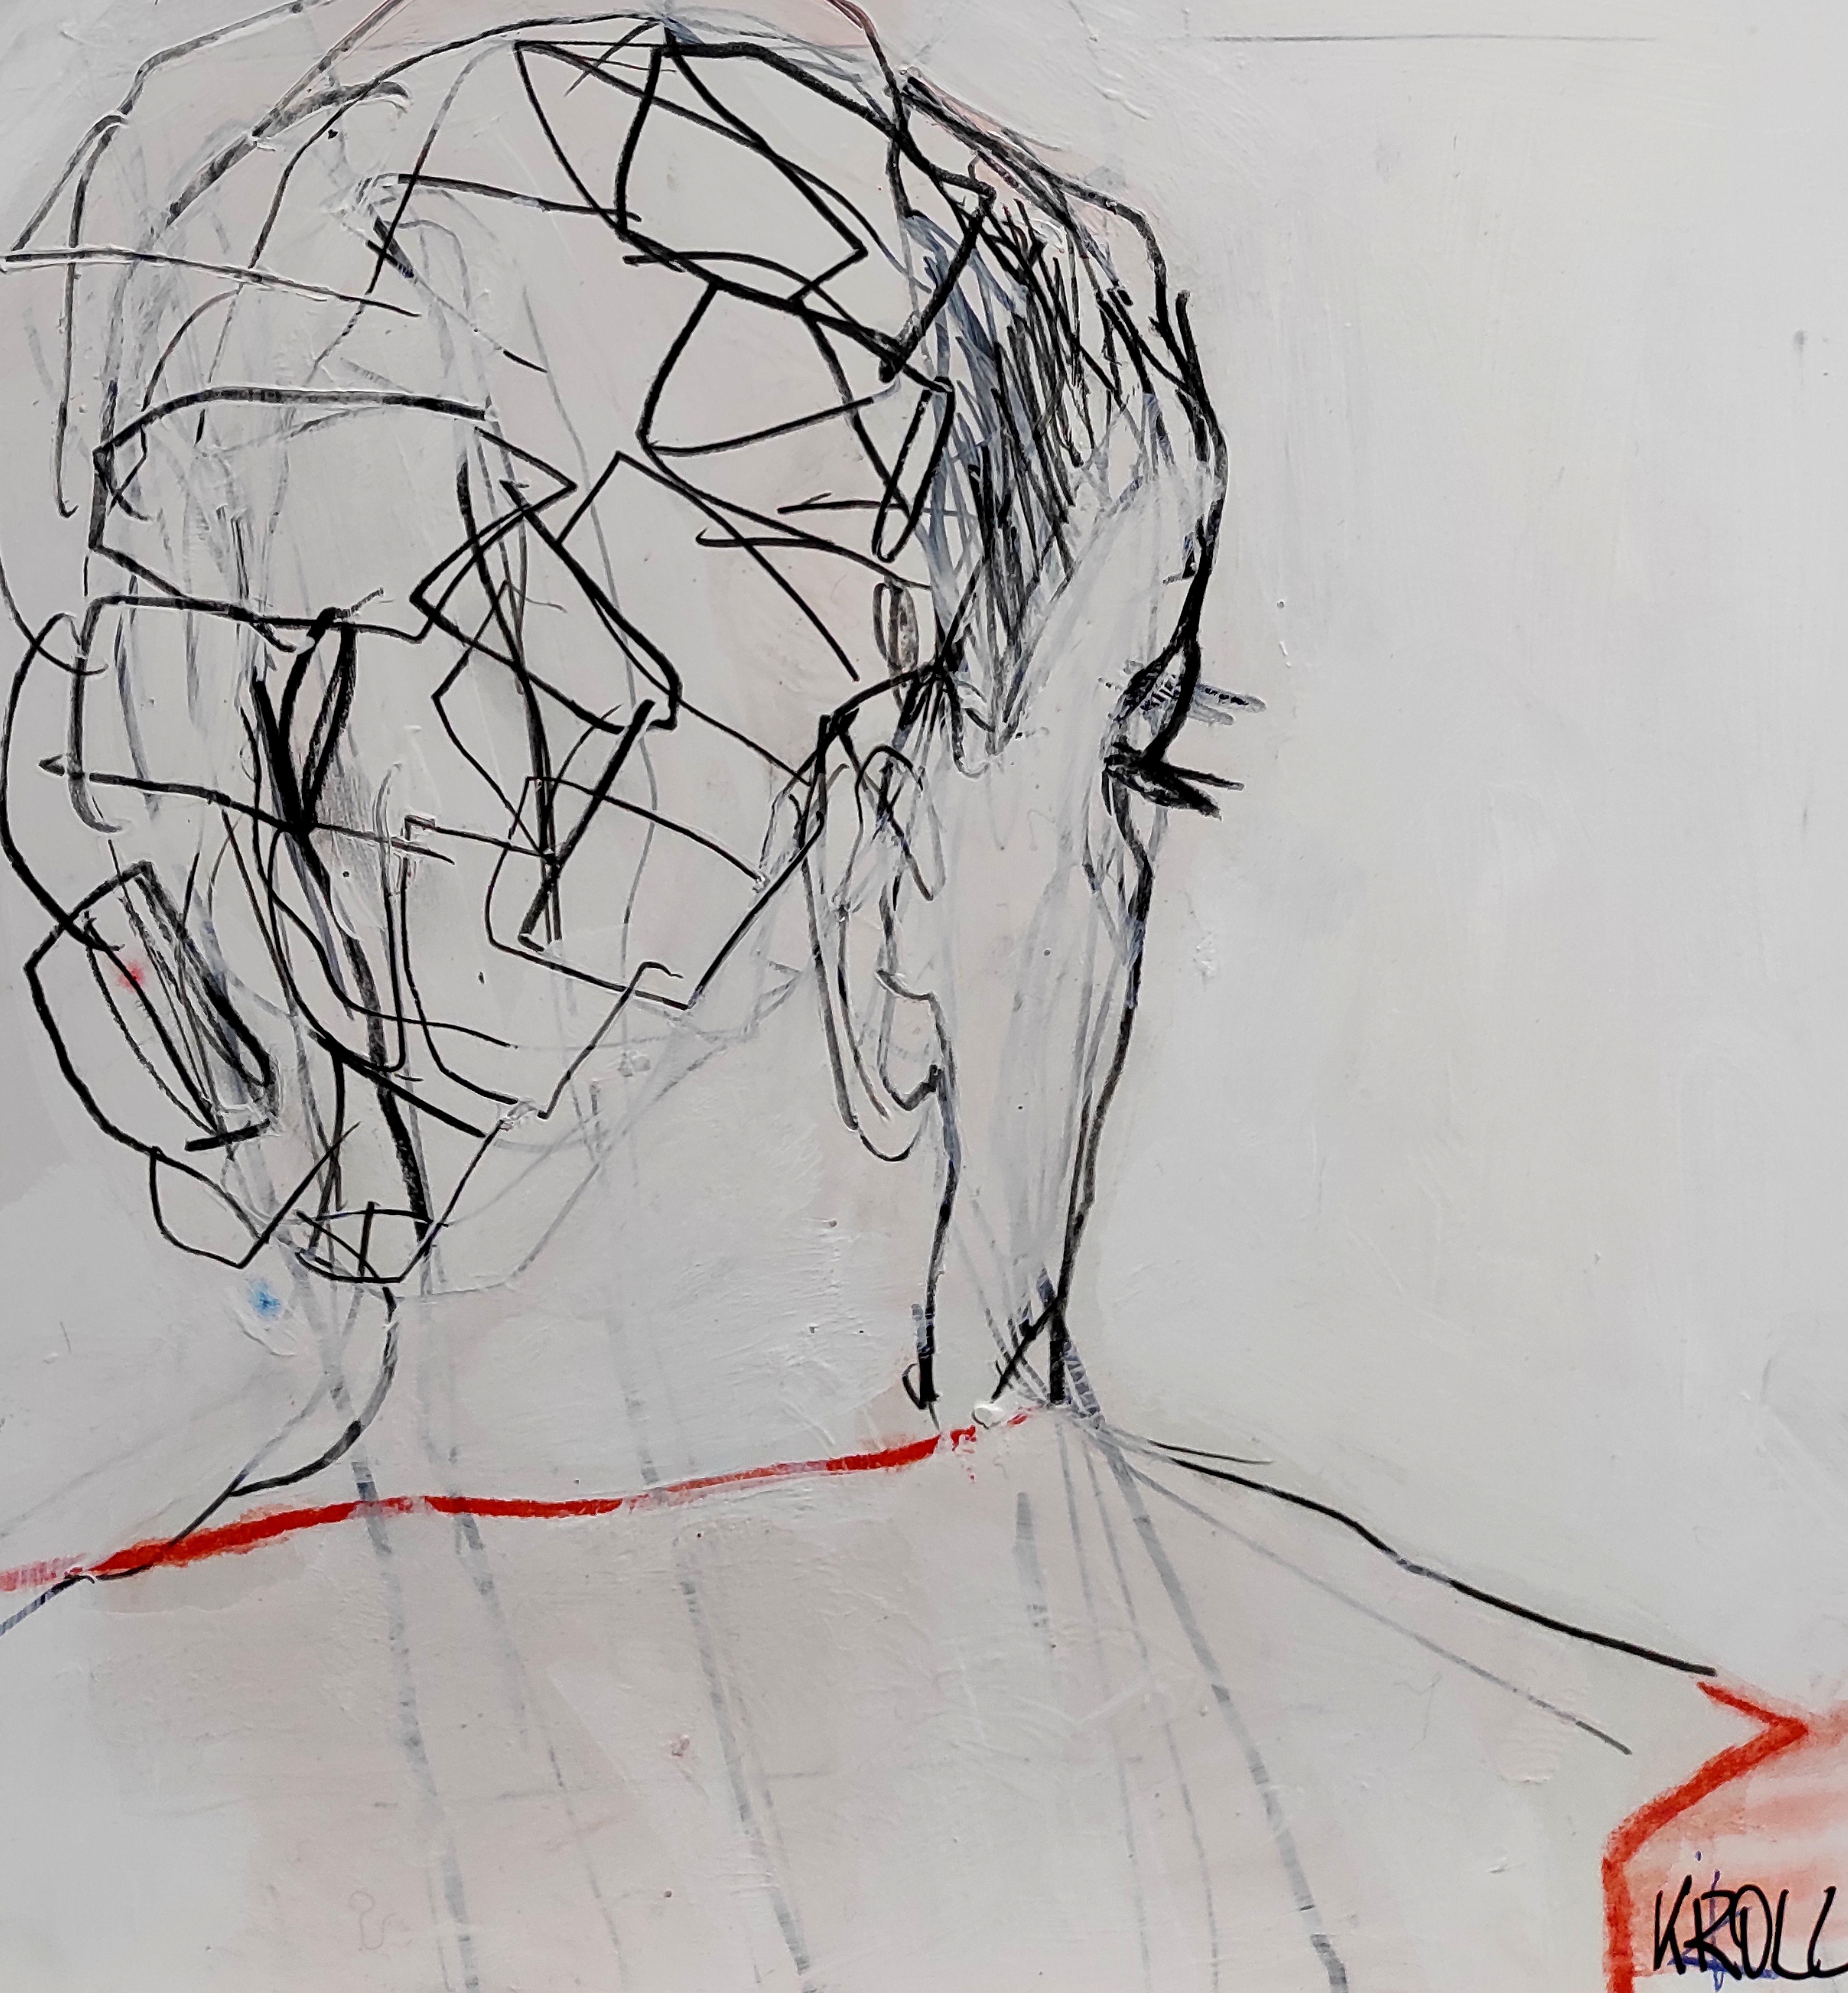 A look from behind, Drawing, Pencil/Colored Pencil on Paper - Art by Barbara Kroll